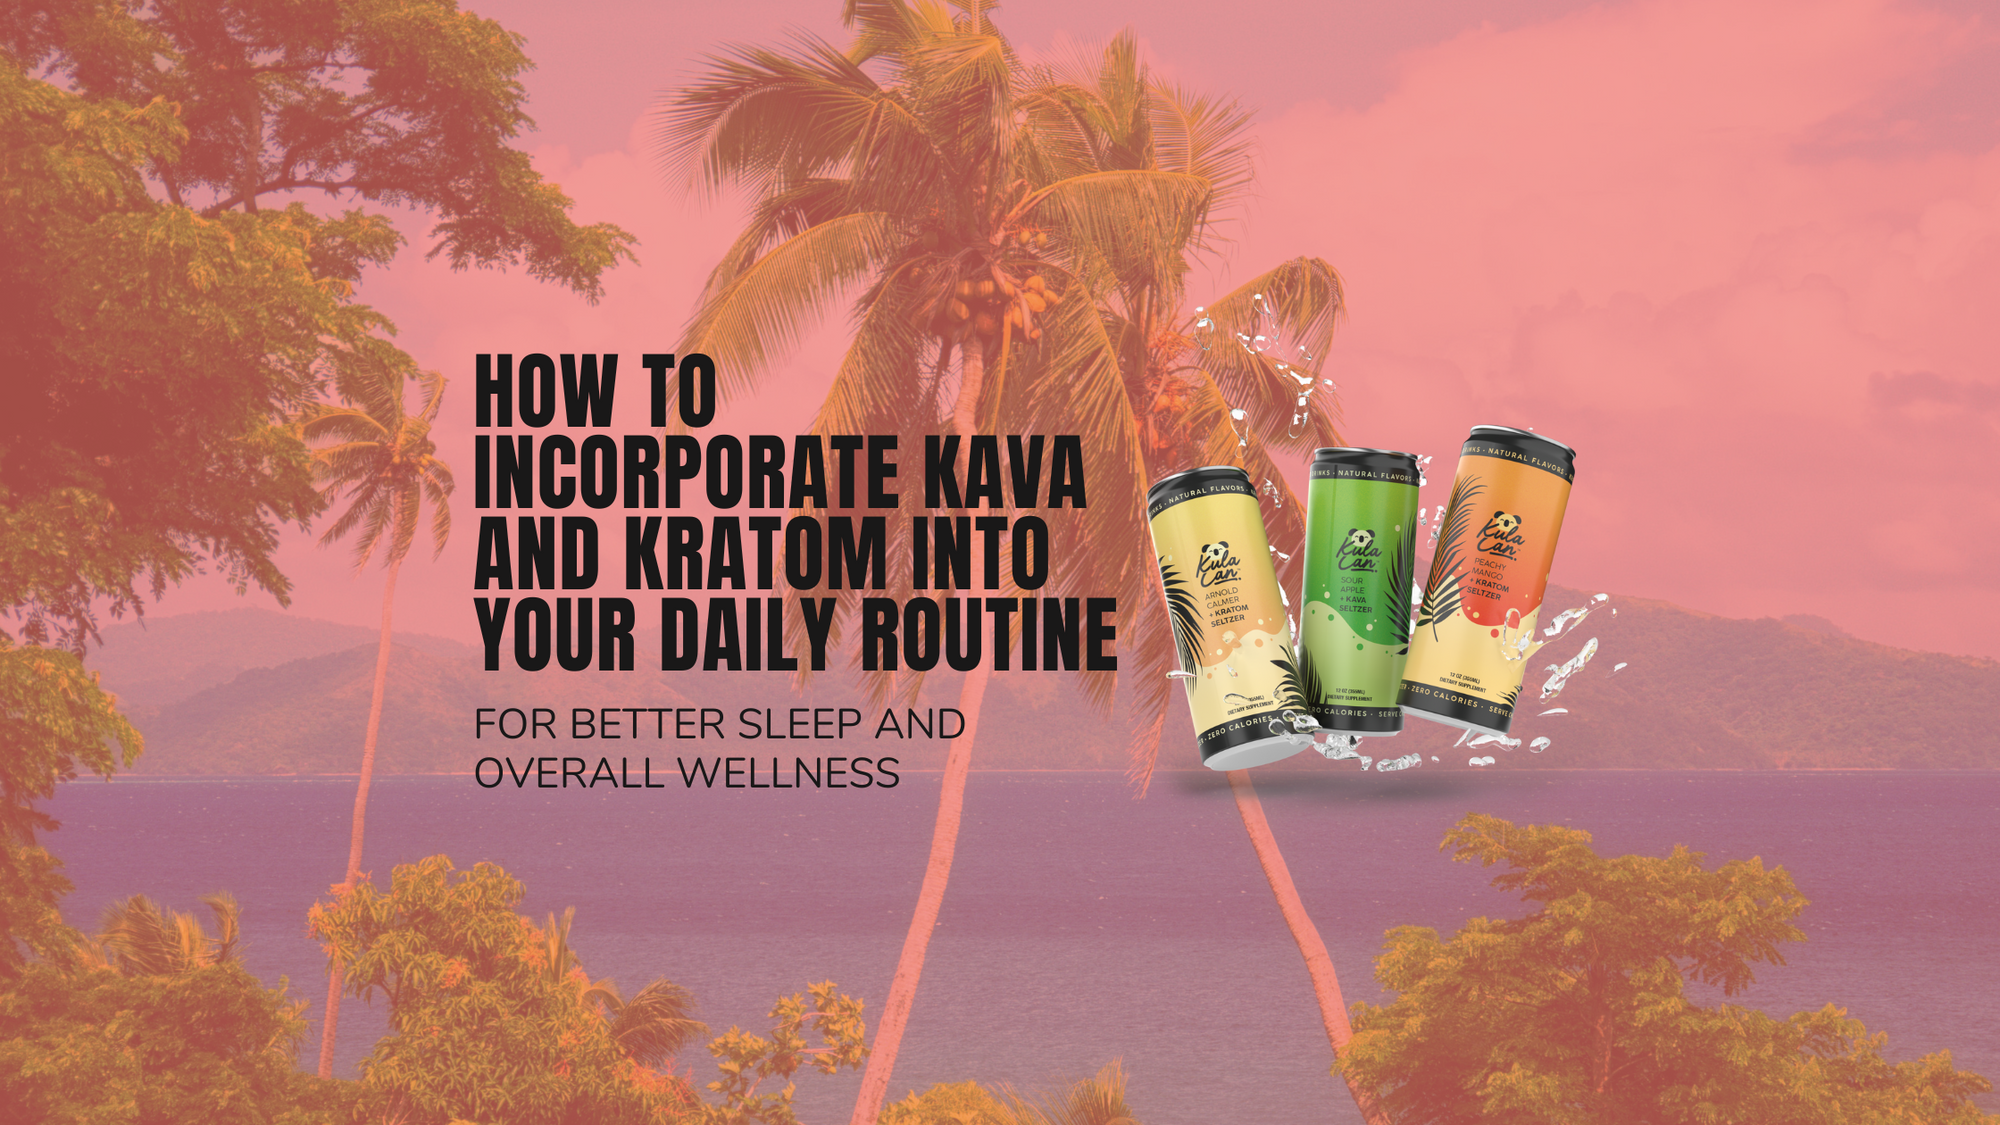 How to Incorporate Kava and Kratom into Your Daily Routine for Better Sleep and Overall Wellness